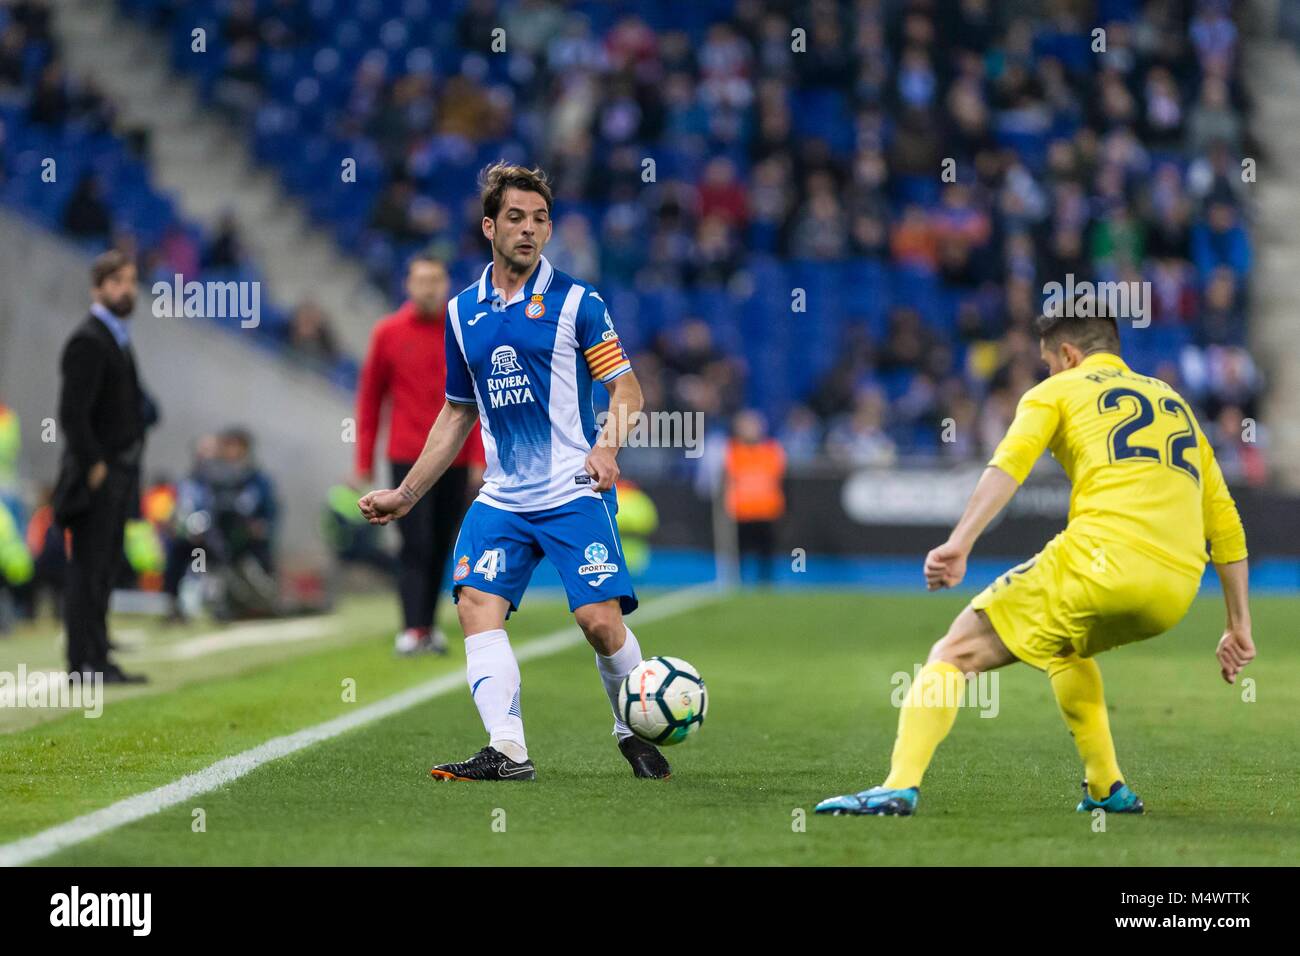 SPAIN - February,18th: RCD Espanyol midfielder Victor Sanchez (4) and Villarreal defender Antonio Rukavina (22) during the match between RCD Espanyol vs Villarreal CF, for the round 24 of the Liga Santander, played at RCD Espanyol Stadium on 18th February 2018 in Barcelona, Spain. (Credit: Mikel Trigueros / Urbanandsport / Cordon Press)  Cordon Press Credit: CORDON PRESS/Alamy Live News Stock Photo